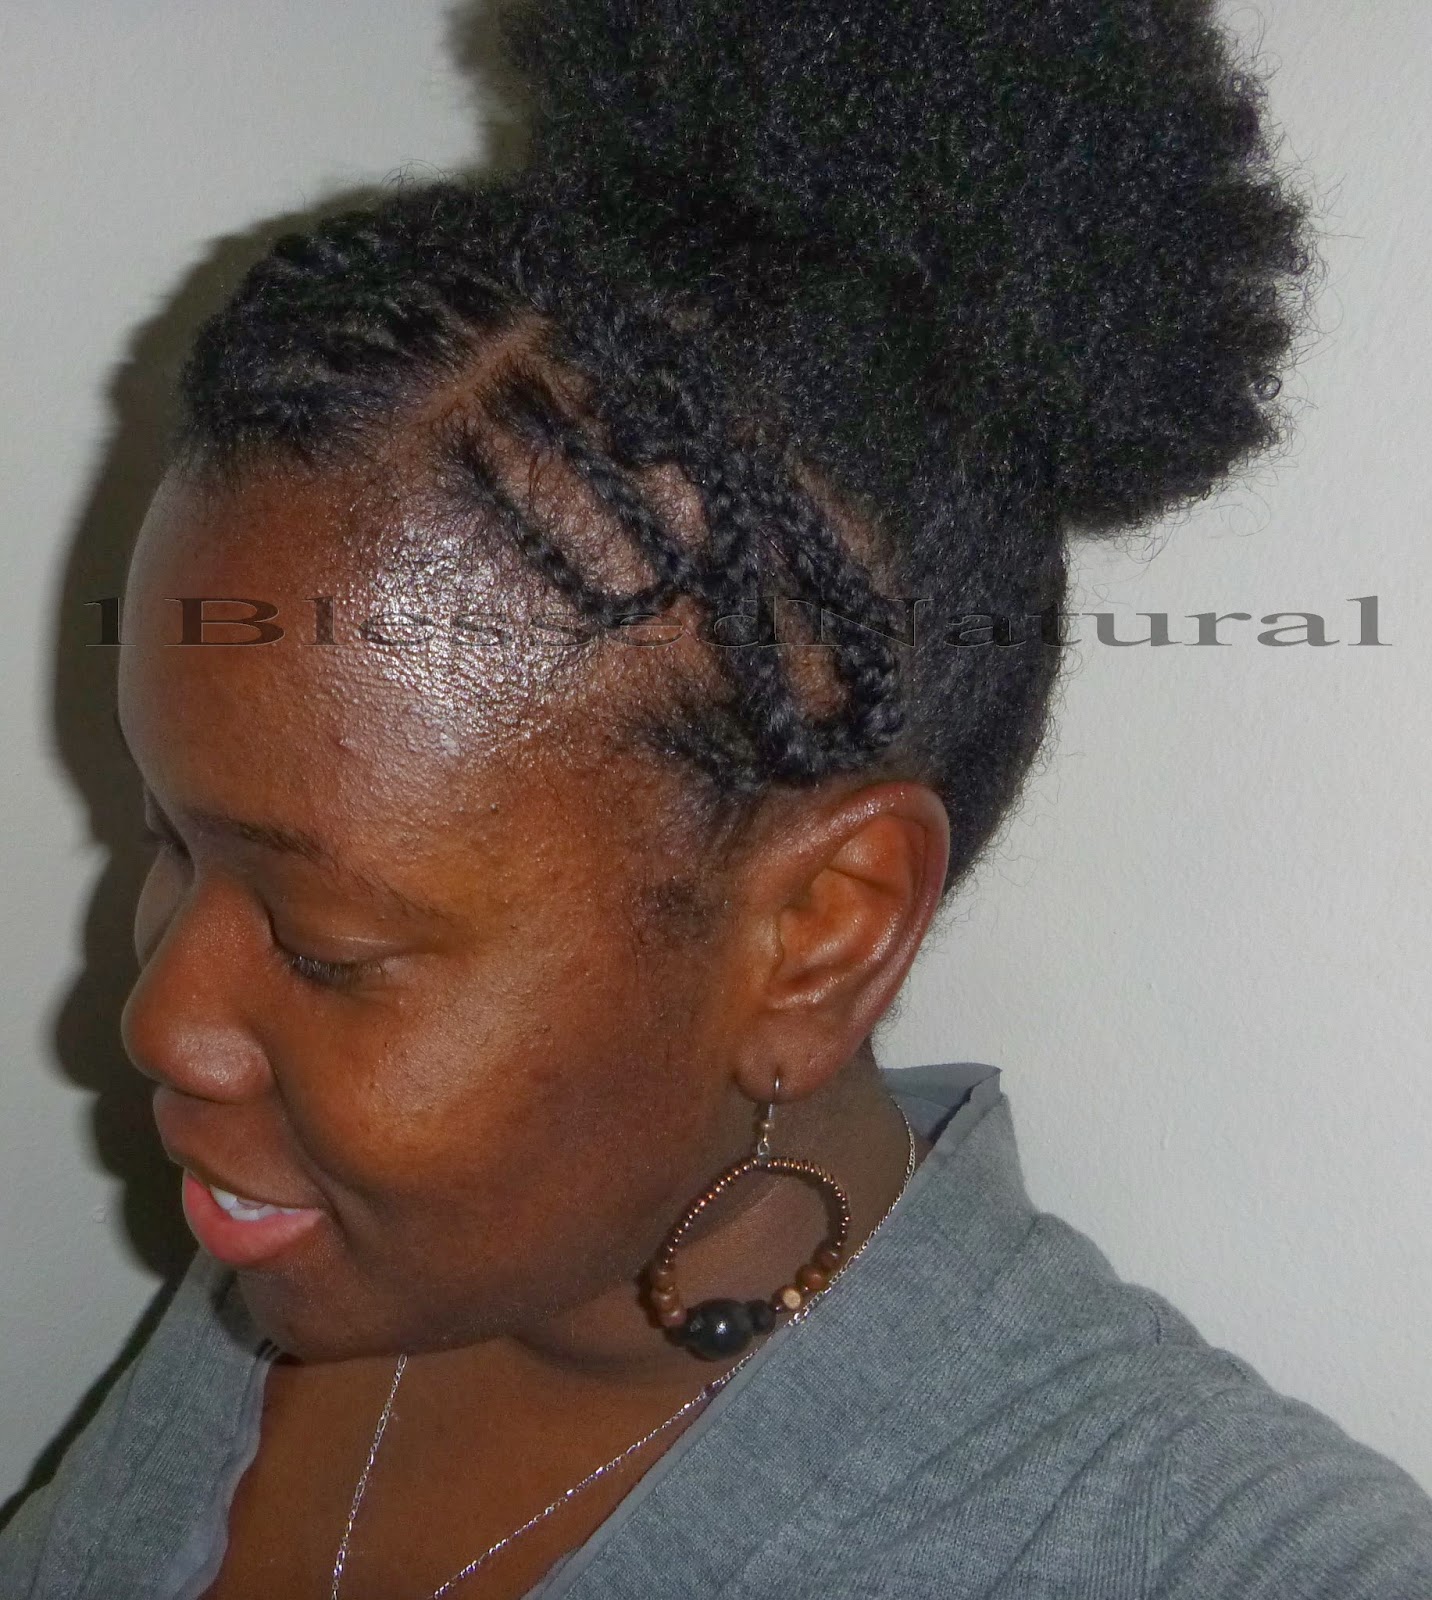 Eritrean Inspired Hairstyle: Front Cornrows, Twists, and Puff